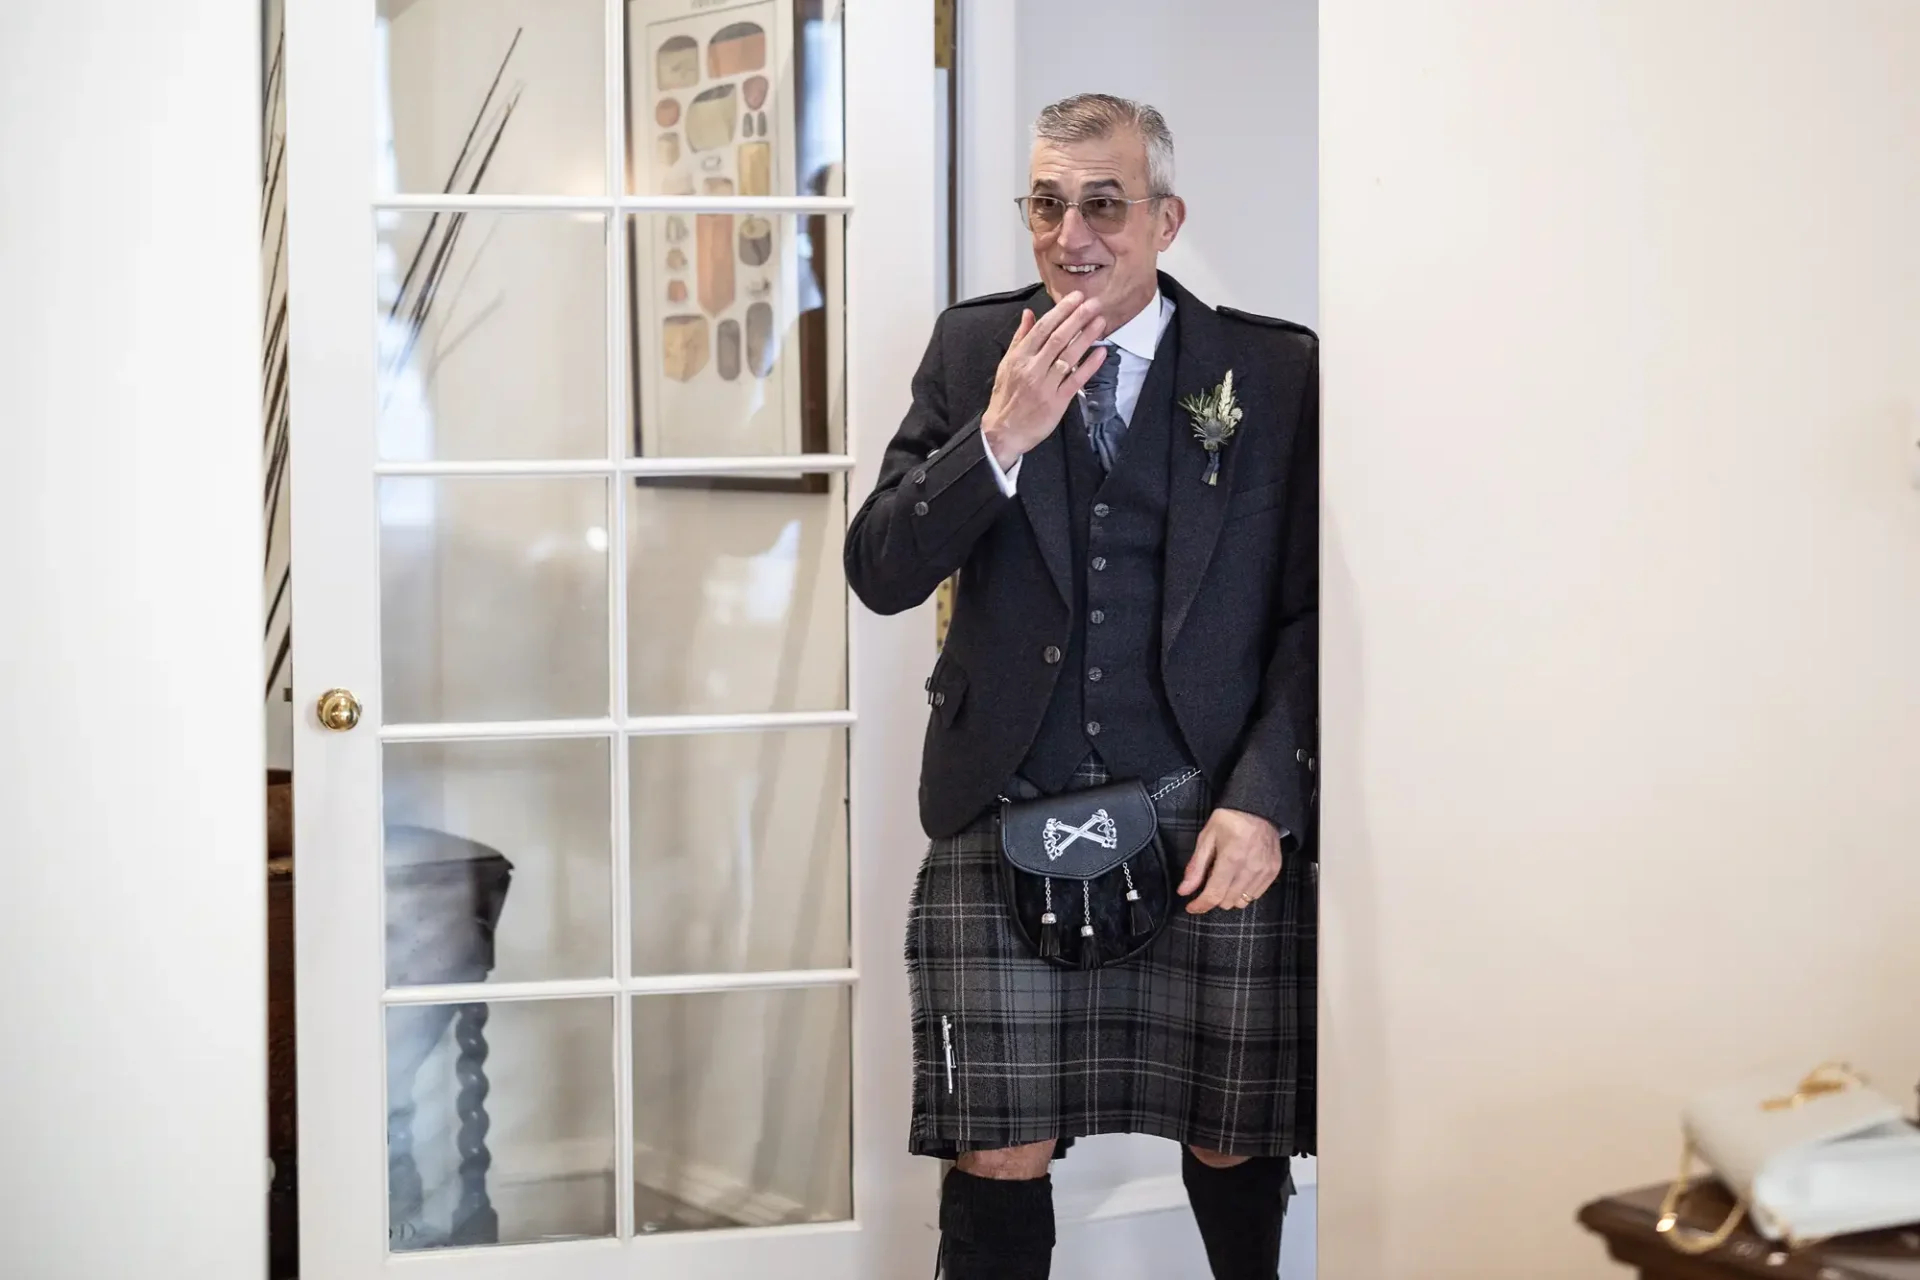 Man in traditional scottish attire with a kilt, smiling and waving in a room with a glass door and wall display.